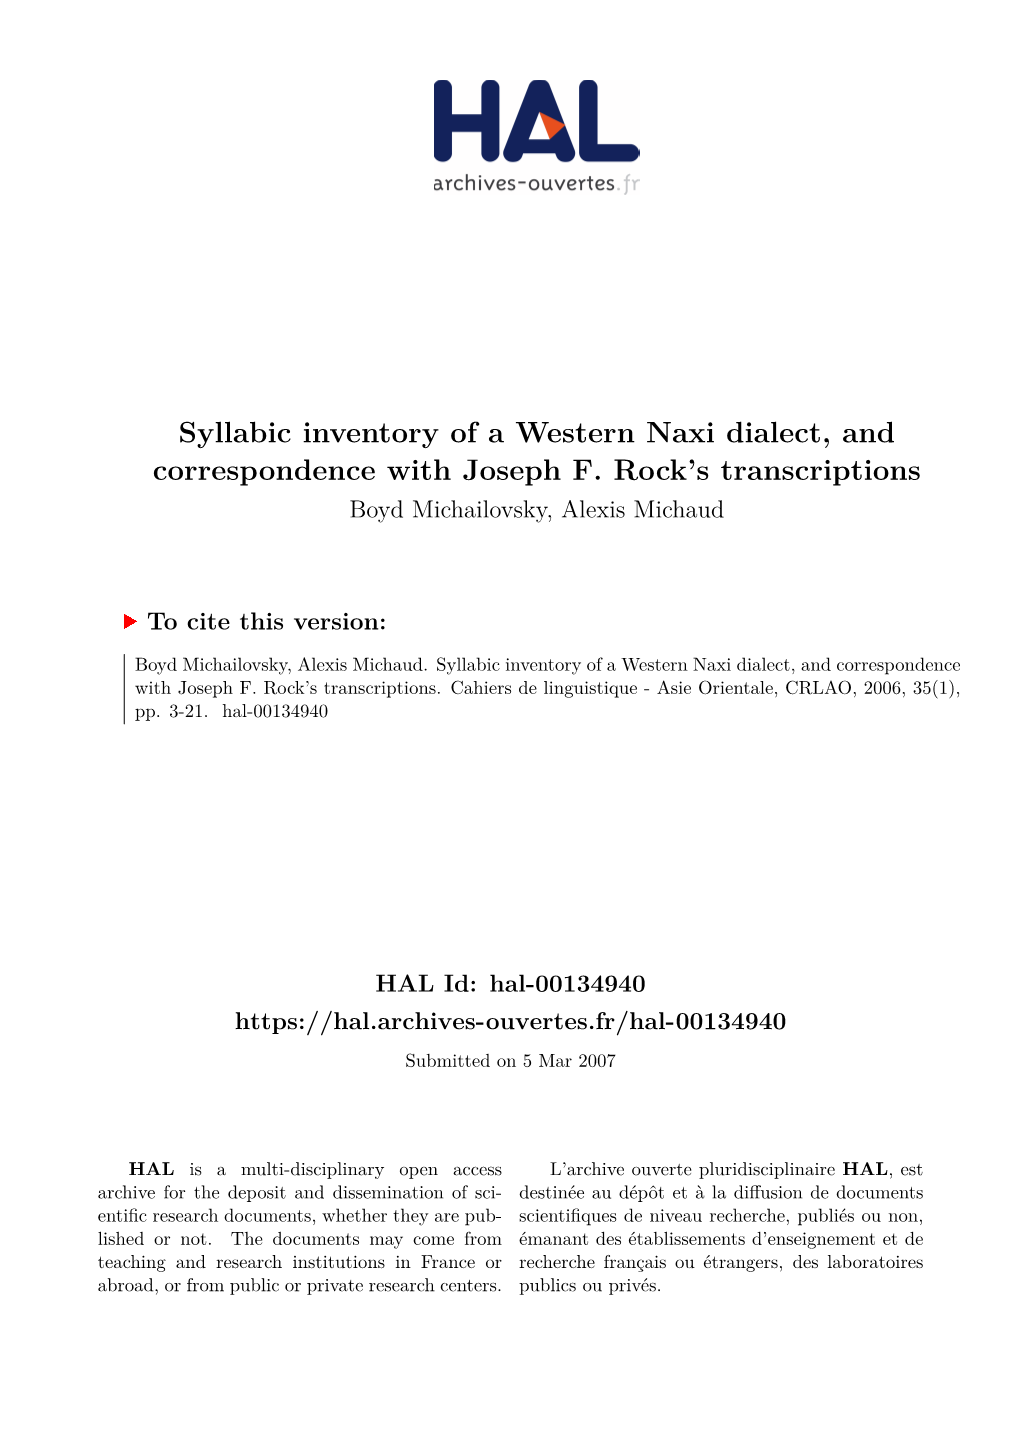 Syllabic Inventory of a Western Naxi Dialect, and Correspondence with Joseph F